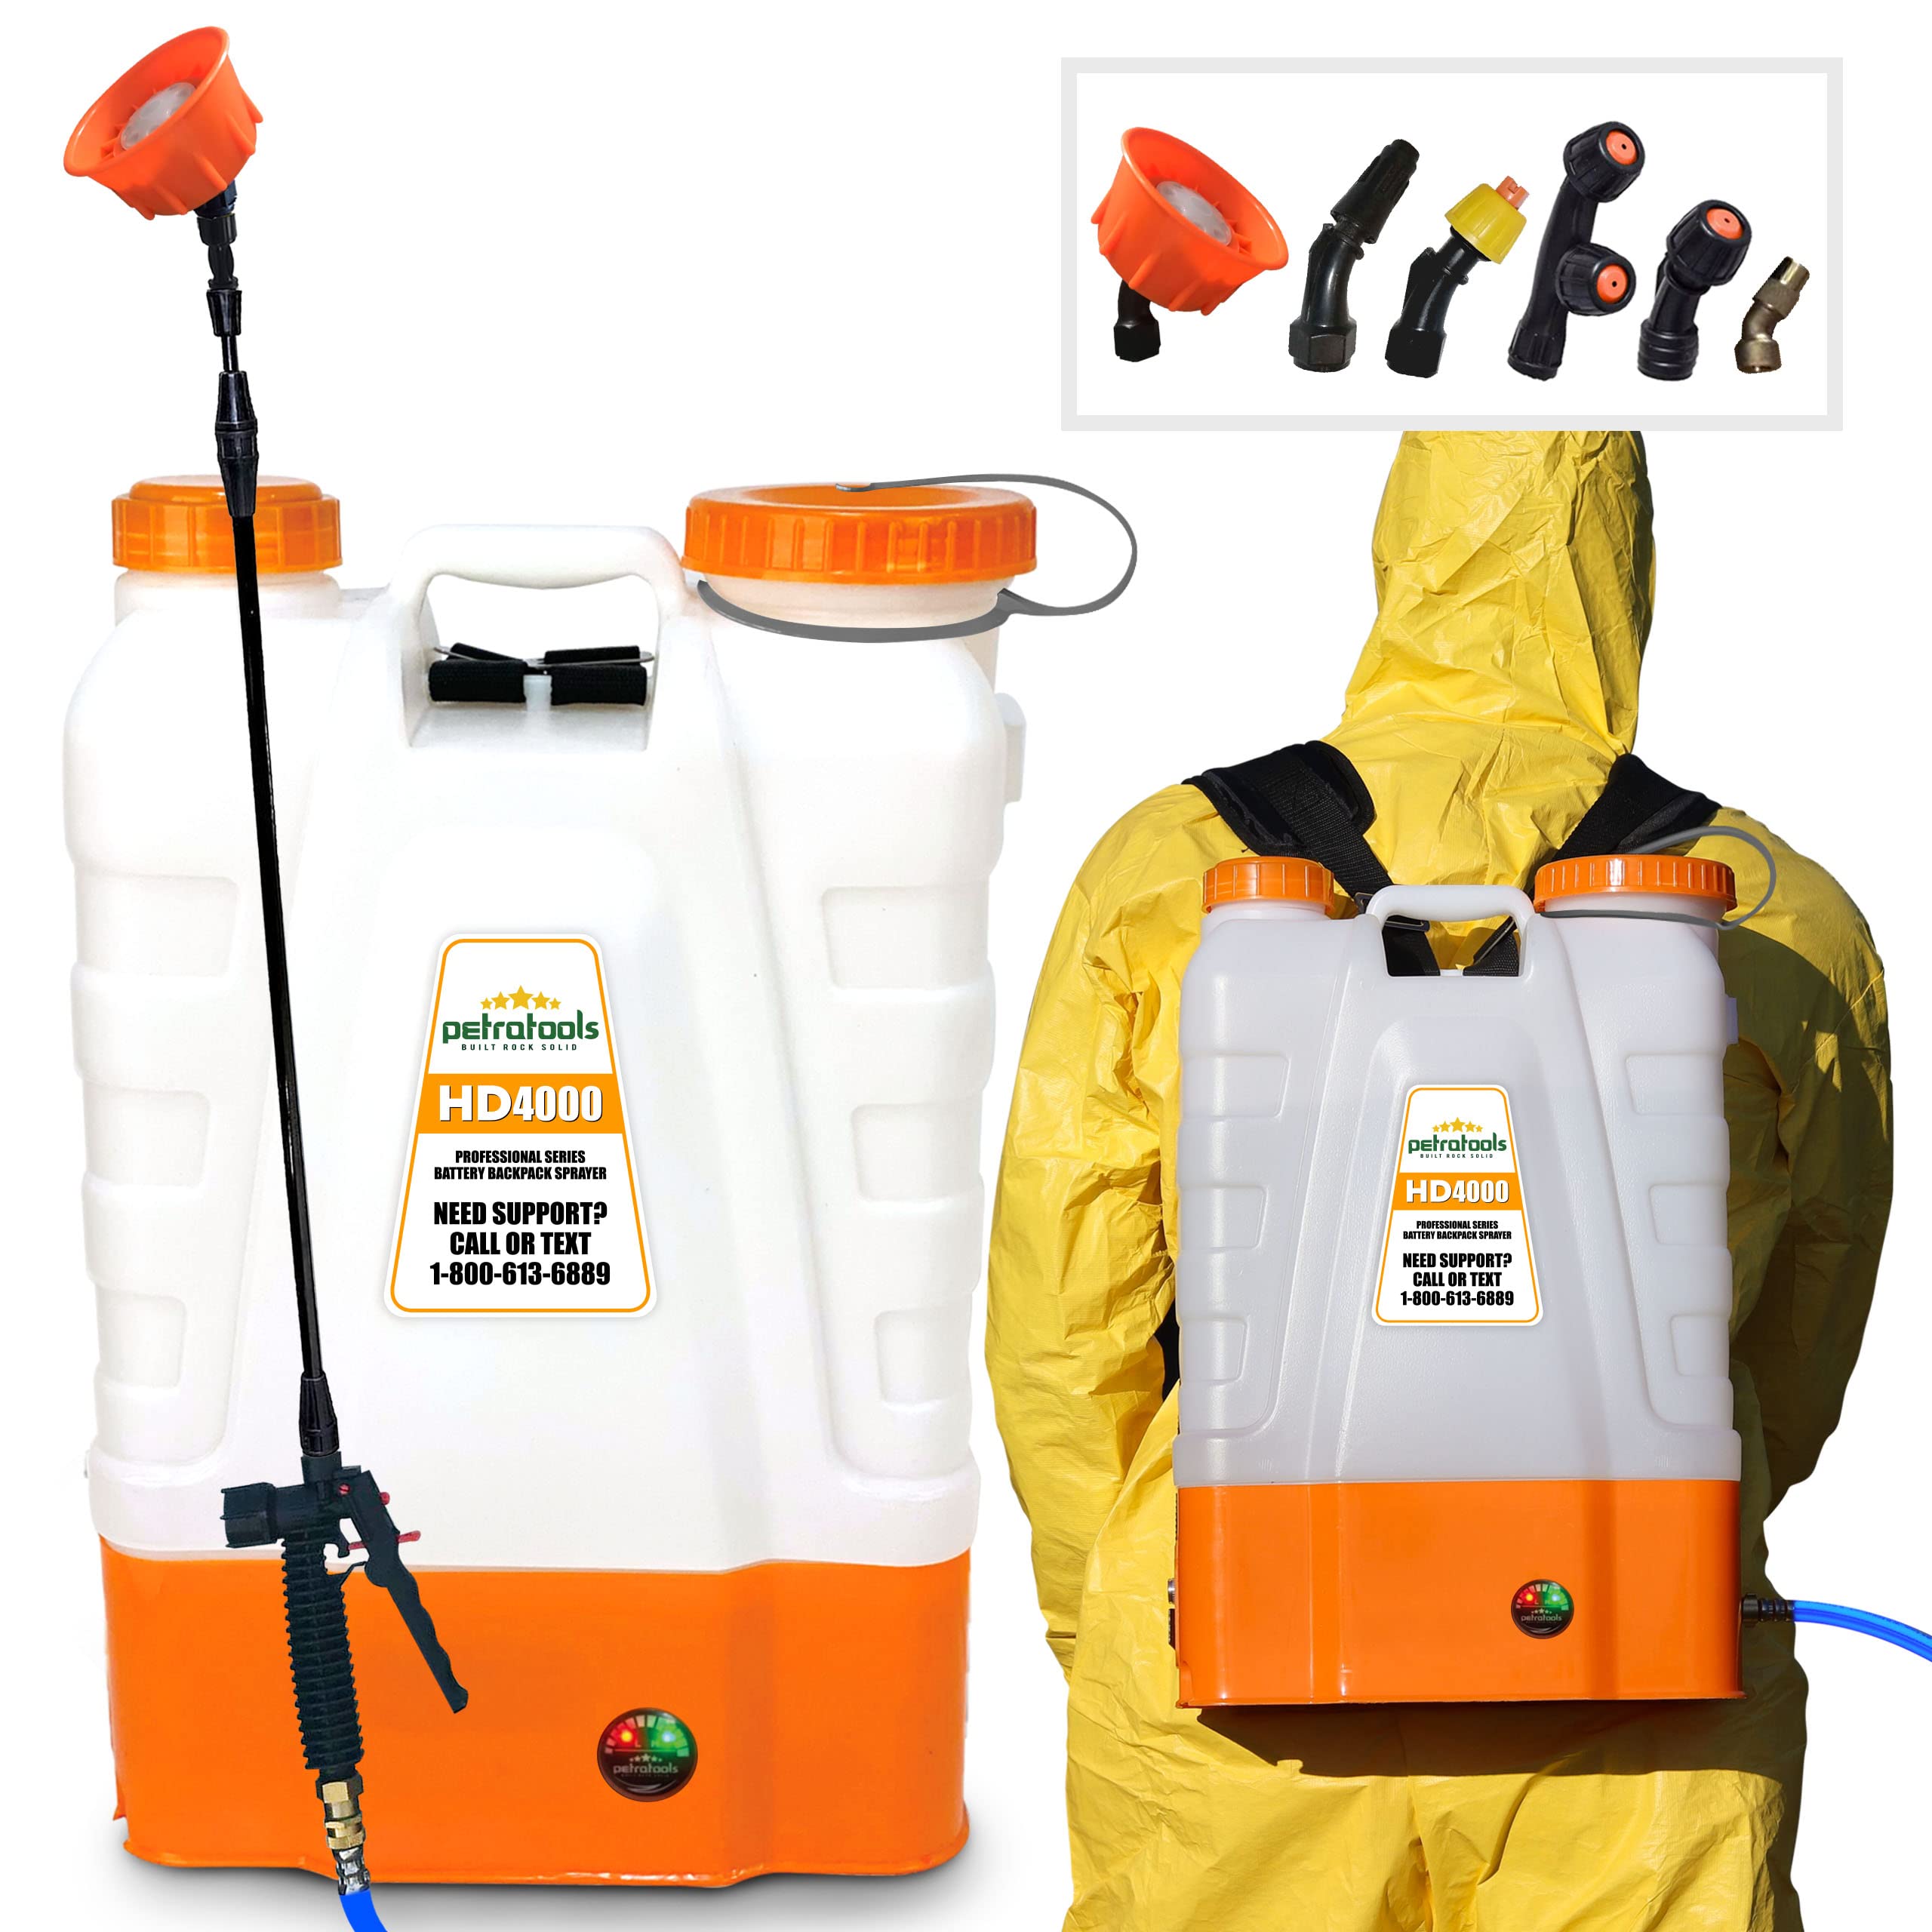 Looking to Buy The Best Backpack Sprayer. Consider The Chapin 61575